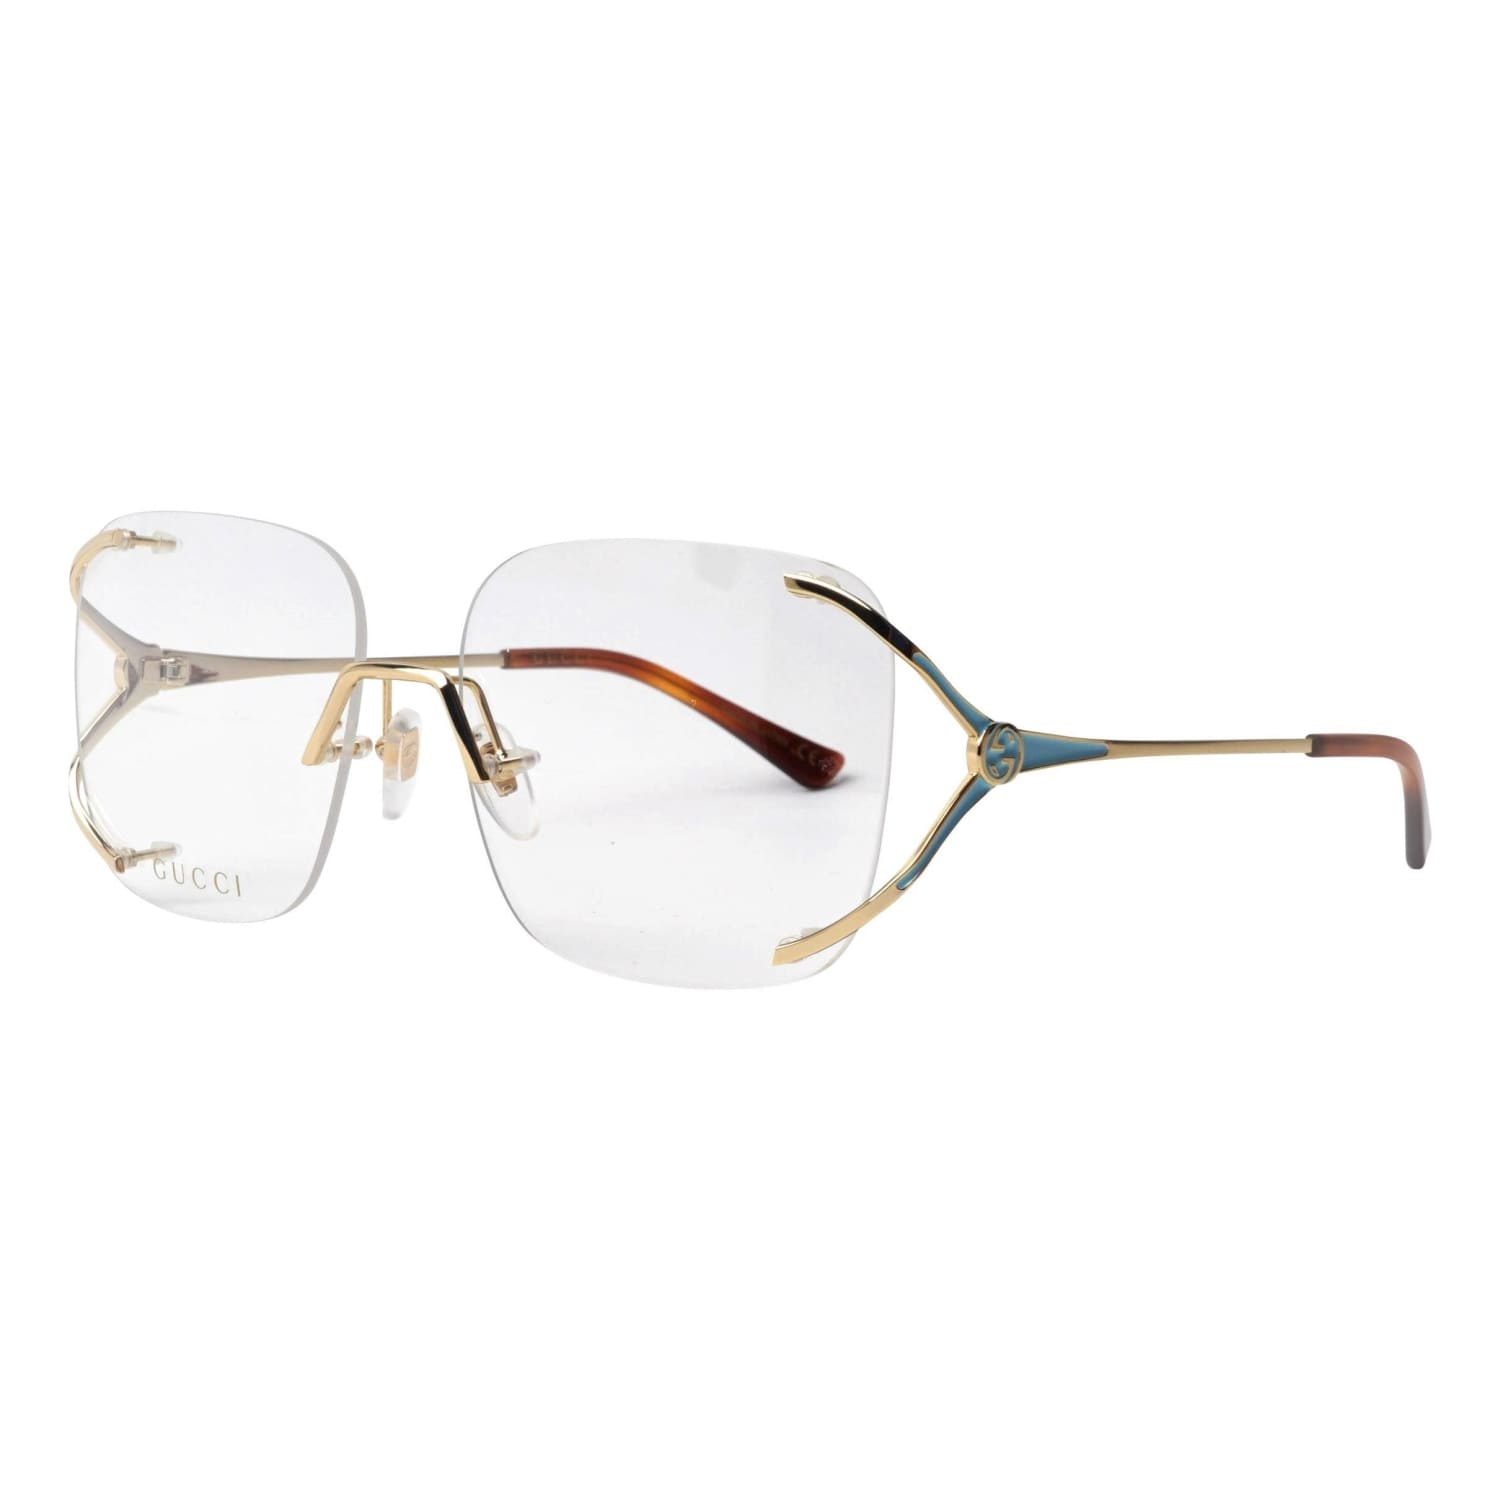 Gucci GG0652O-002 Gold Metal Rimless Square Frame Clear Lens